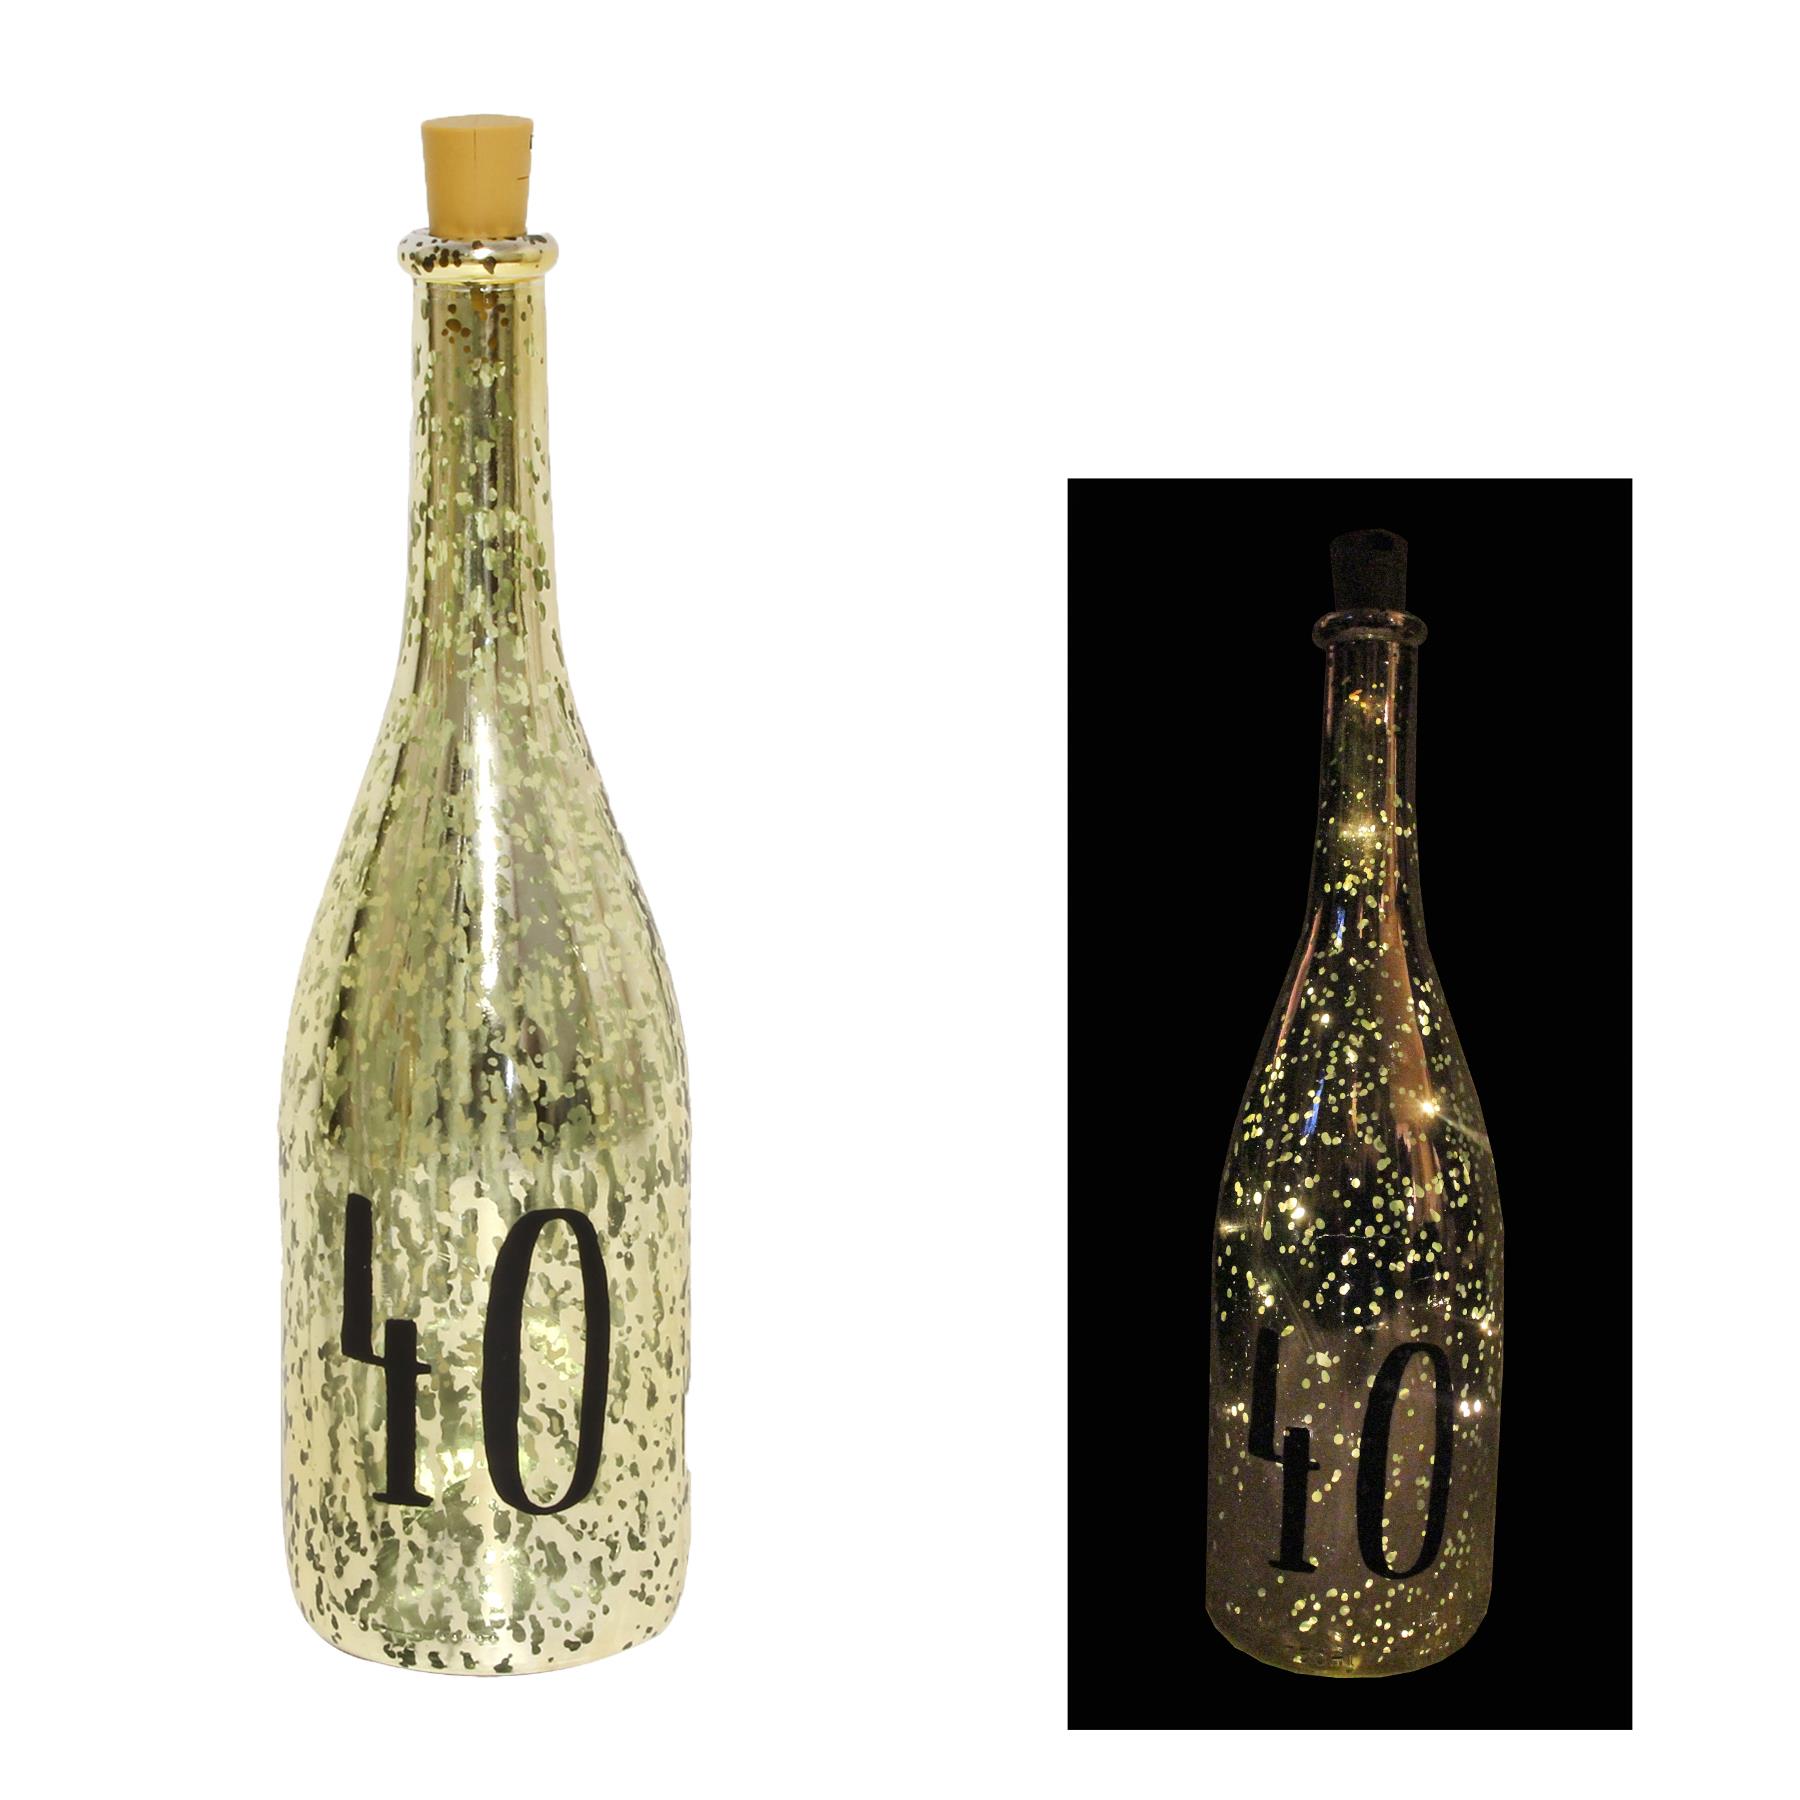 Gold Crackle Glaze Battery Light Up Bottle with Number - 40th Birthday Gift